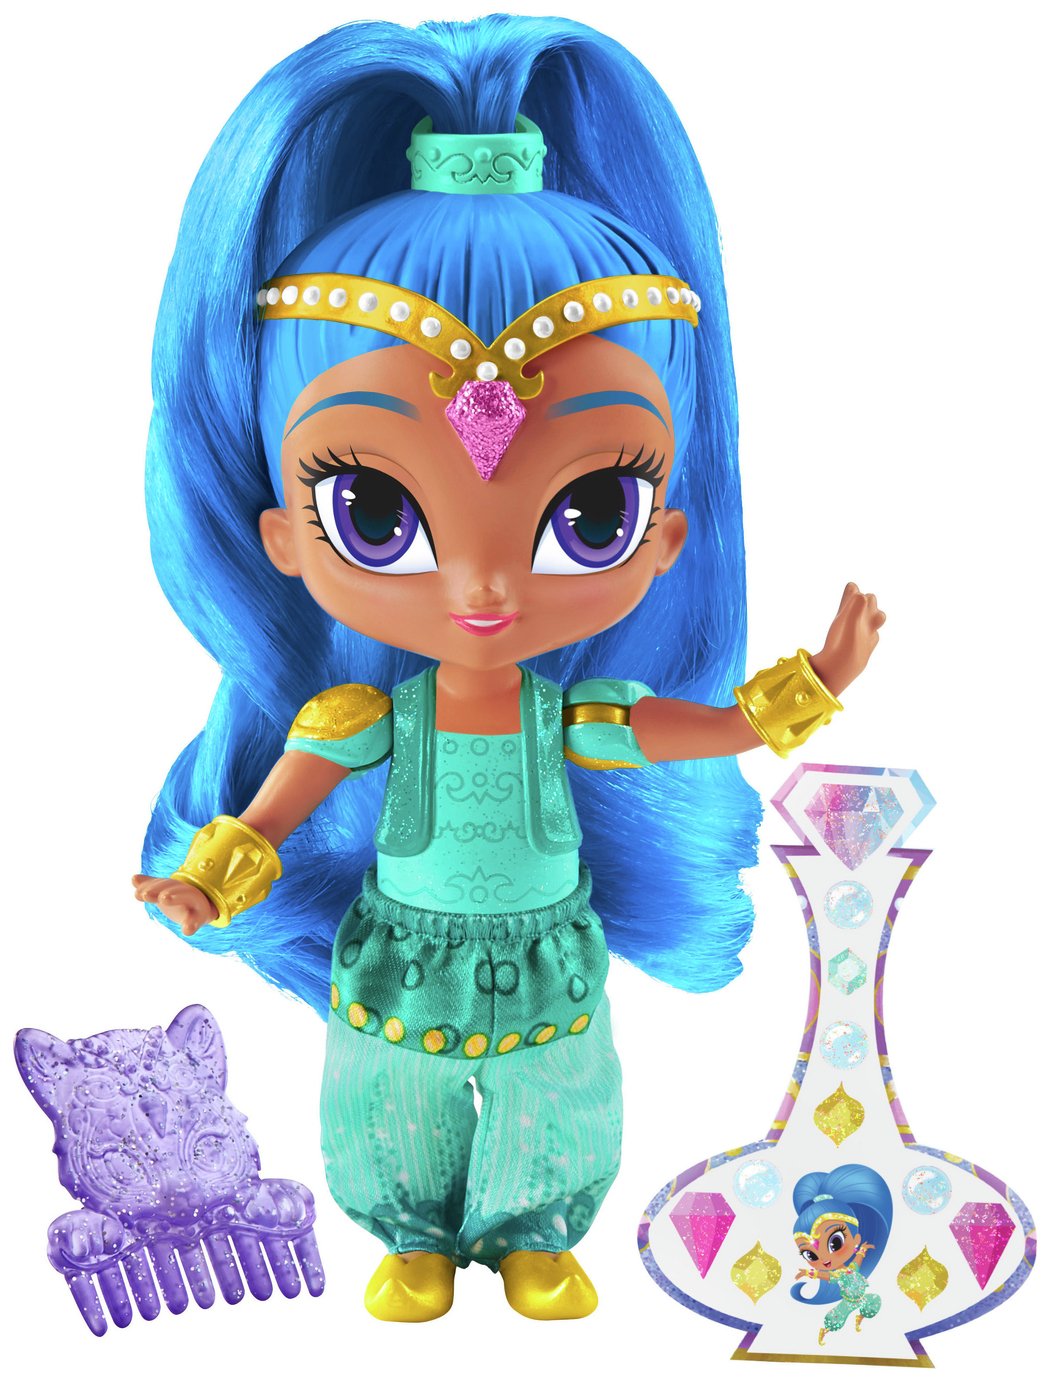 Shimmer and Shine Shine Doll Review